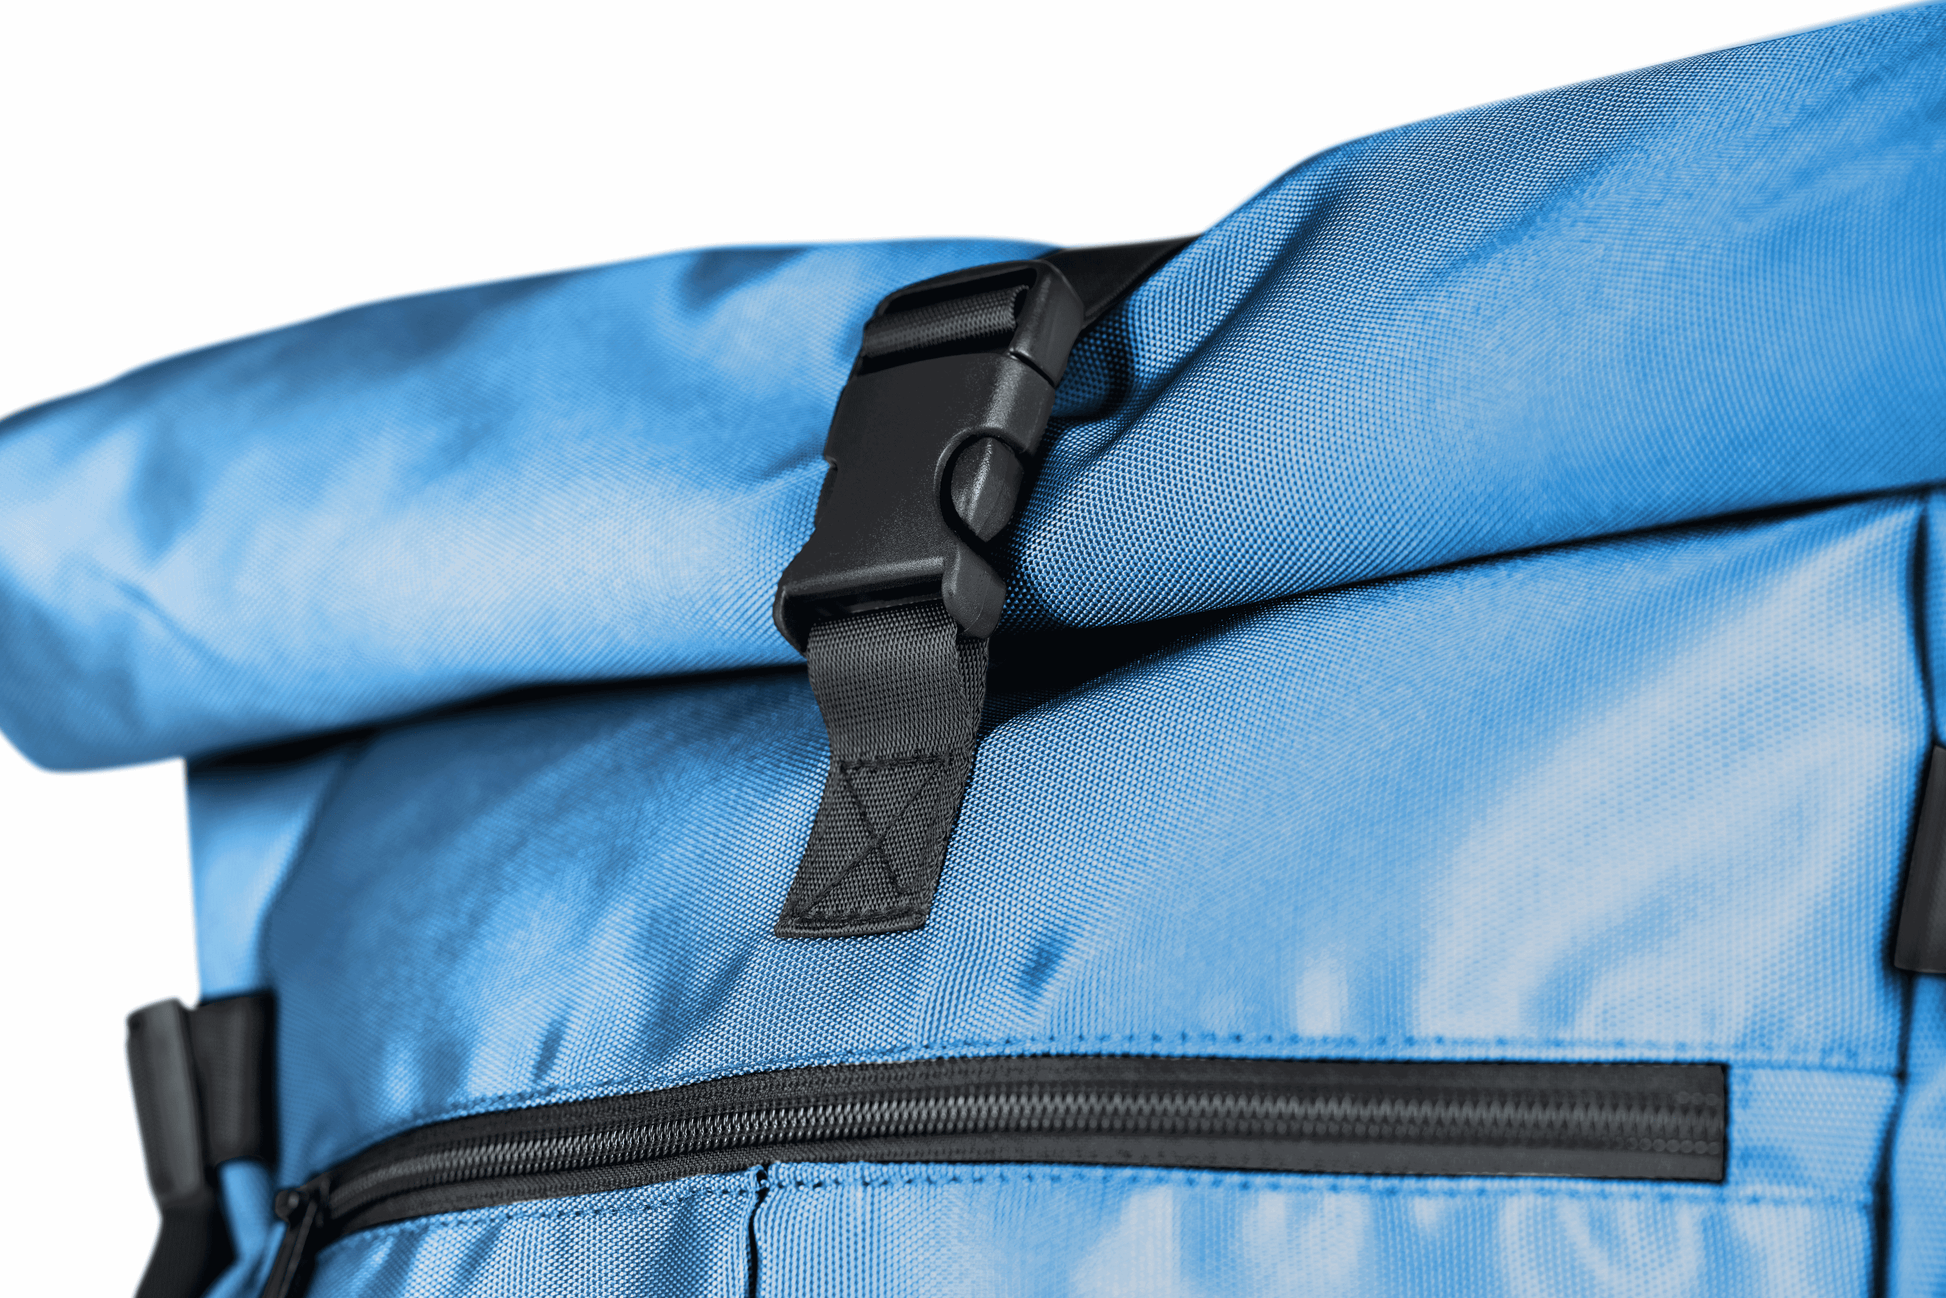 The Roo betty Nyx back pack uses quality materials 